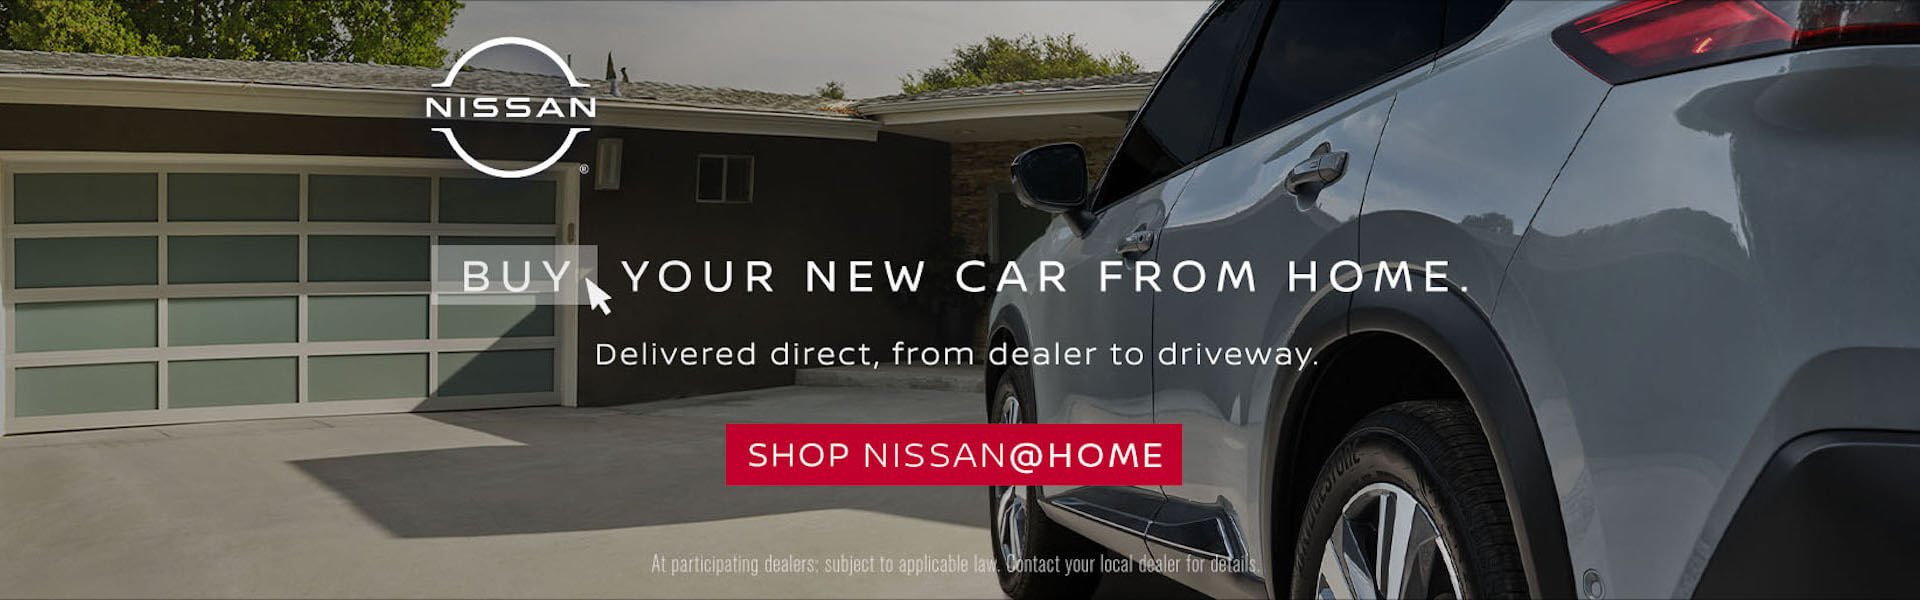 Buy Your New Car From Home. Start Shopping.